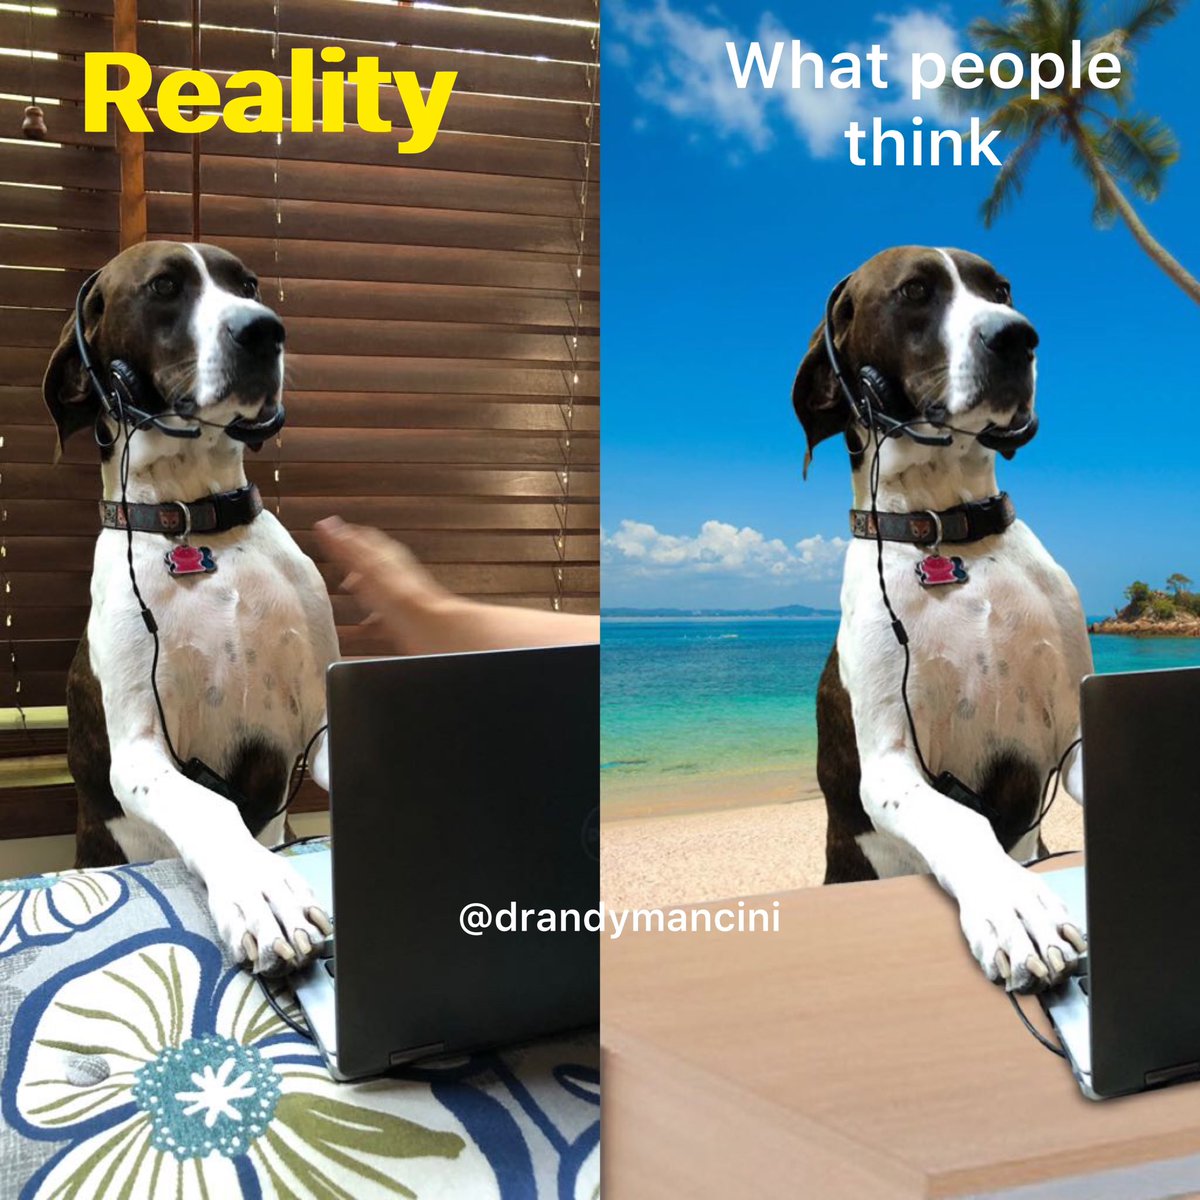 I want you in your cubicle by 7:00 am
Are we working like a dog? And no one is throwing a bone?
#letsconnect #follow #itworld 
#smile #DigitalNomads #workhorse #WorkFromAnywhere
#EmbracingChange
#WorkLifeIntegration
#HumanConnections #DigitalReality #dental #dentistry #callcenter